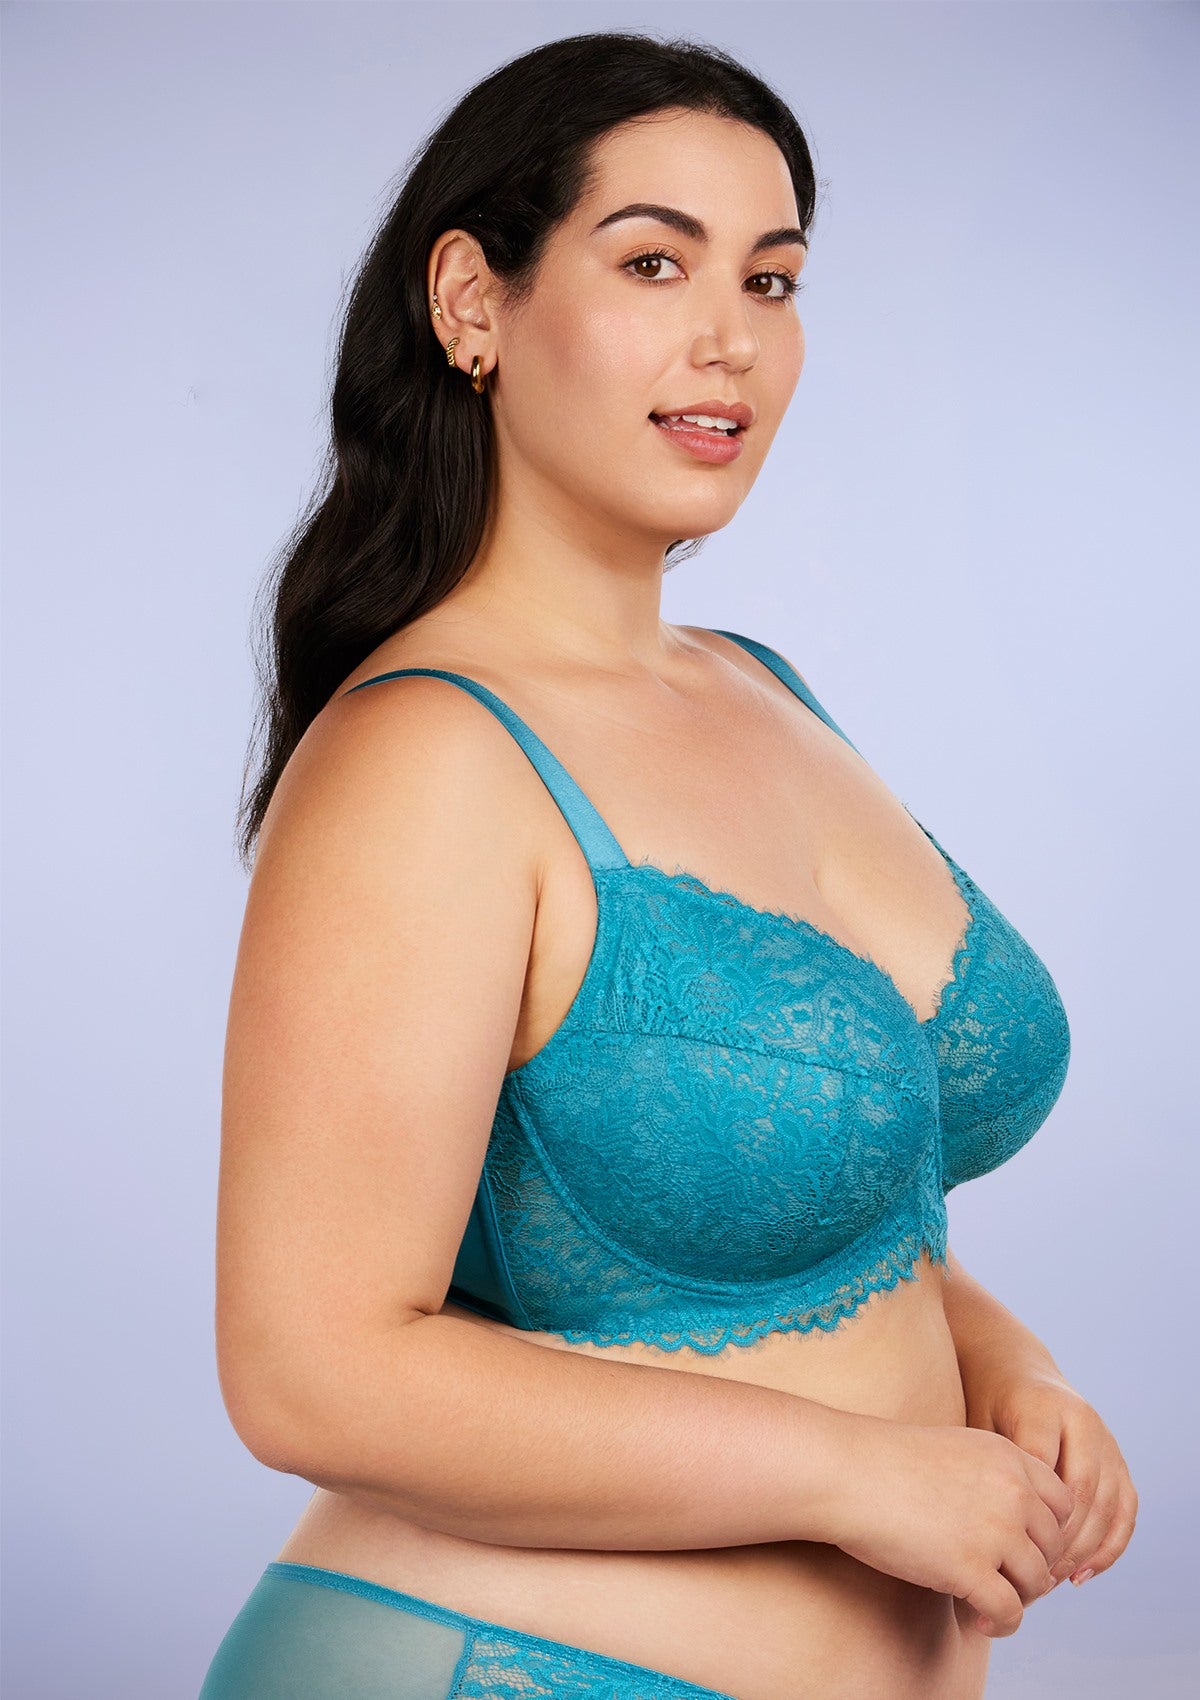 HSIA Sunflower Unlined Lace Bra: Best Bra For Wide Set Breasts - Sky Blue / 40 / H